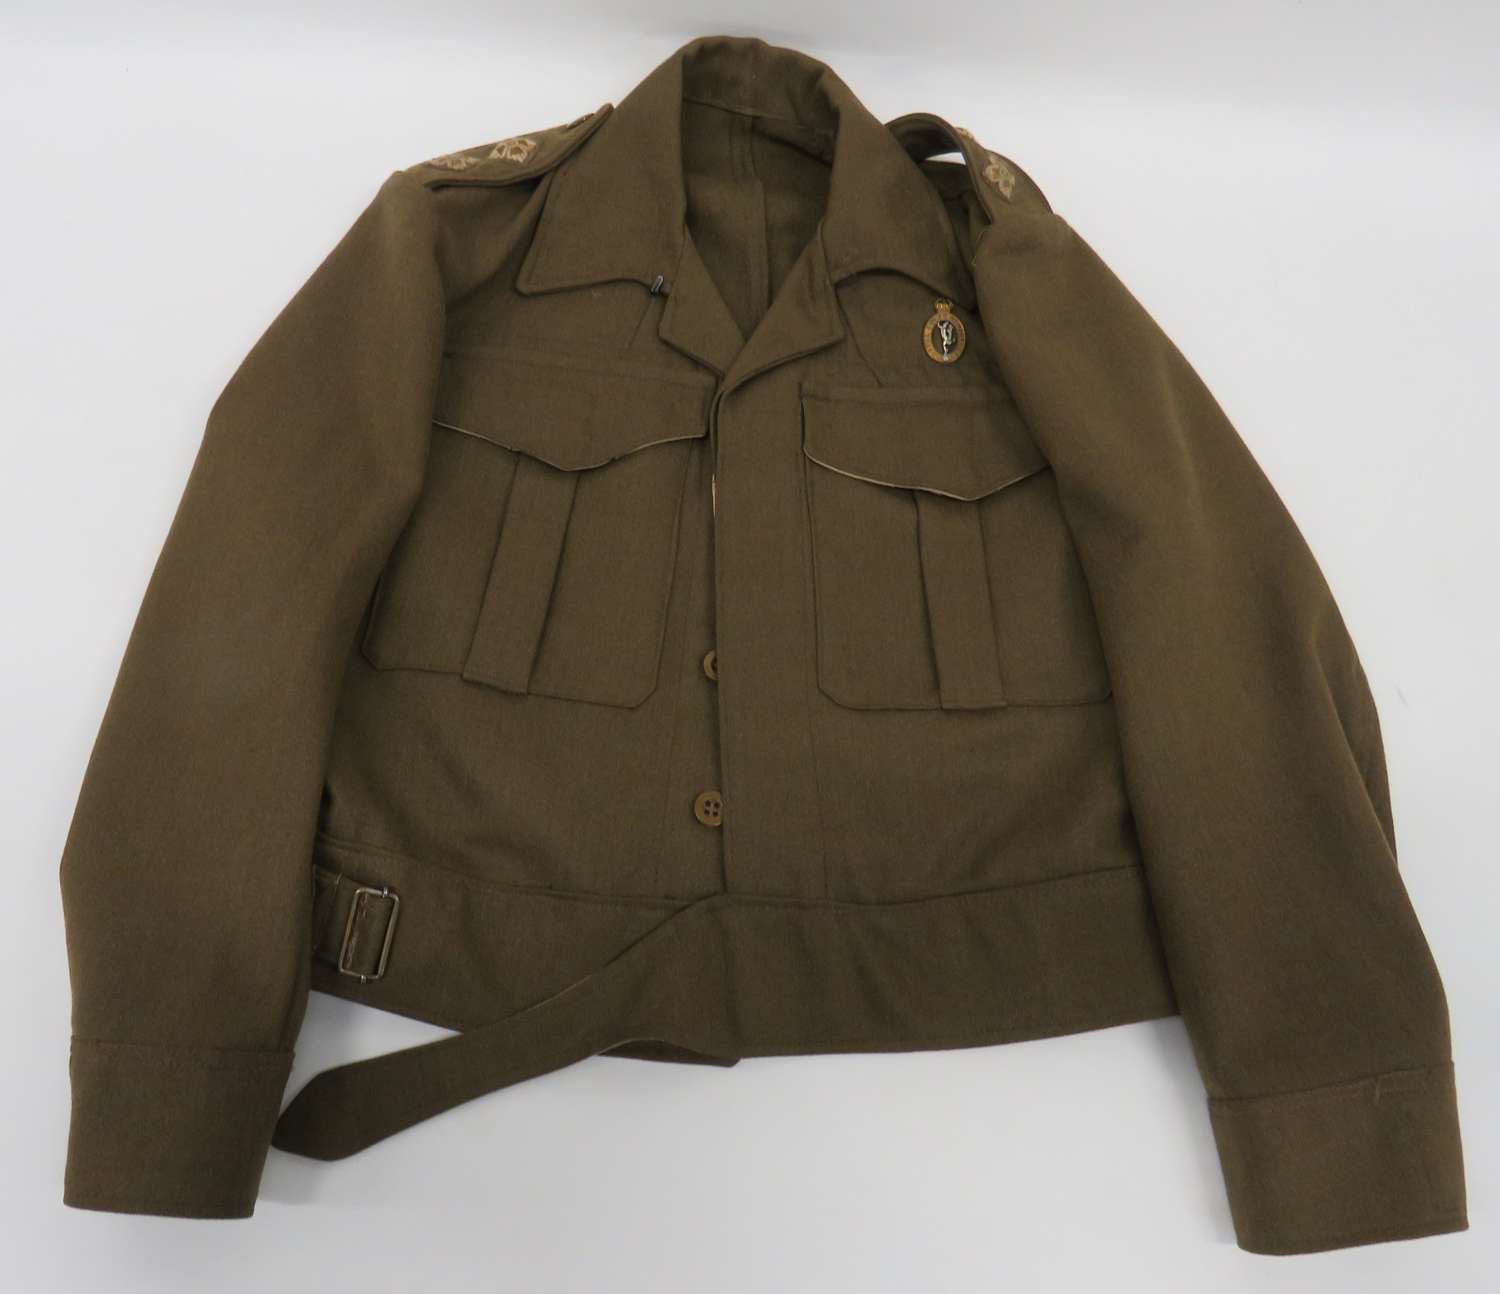 Private Purchase A.T.S Officers Battle Dress Jacket